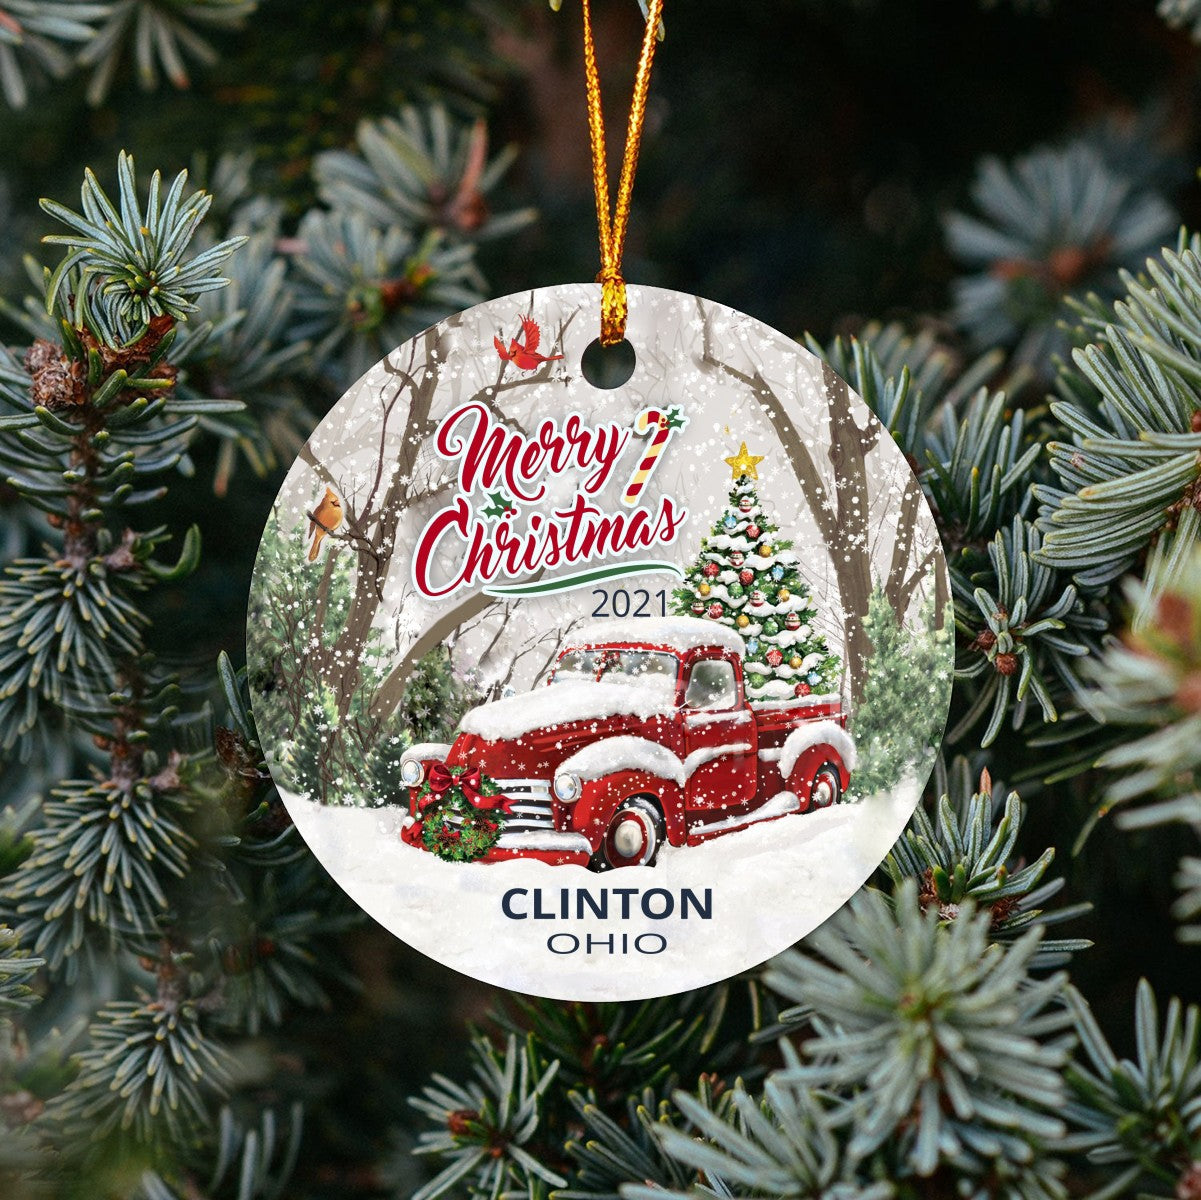 Christmas Tree Ornaments Clinton - Ornament With Name City, State Clinton Ohio OH Ornament - Red Truck Xmas Ornaments 3'' Plastic Gift For Family, Friend And Housewarming